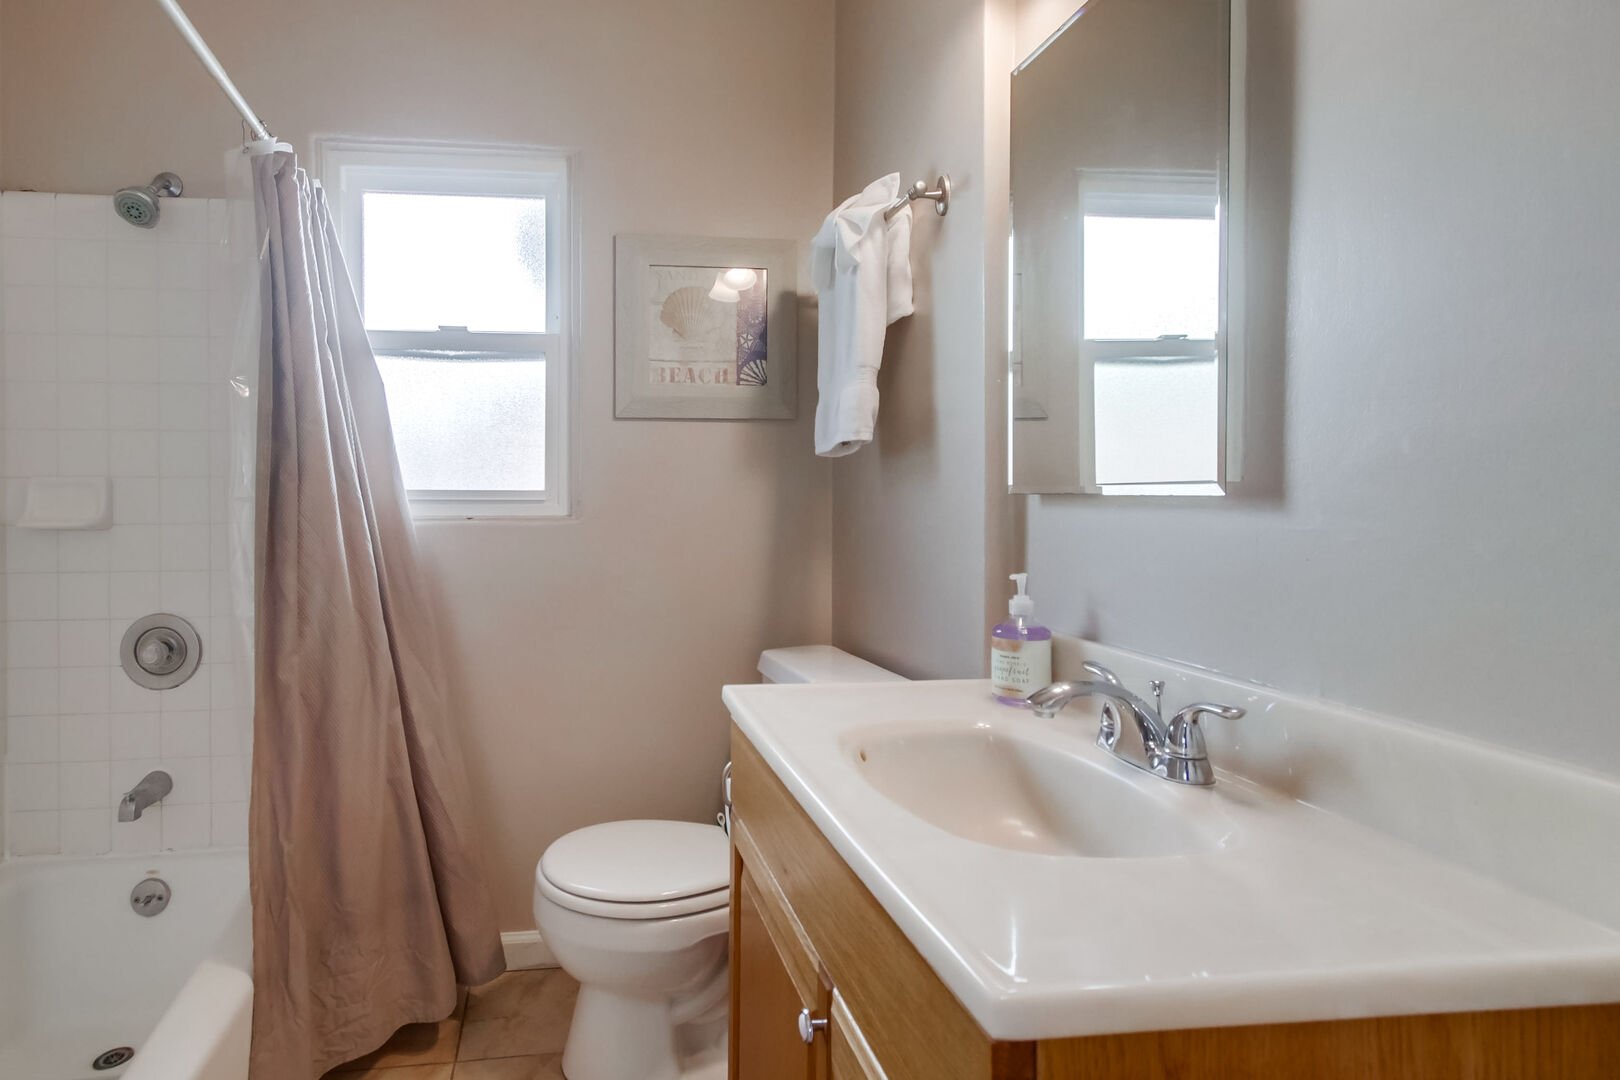 Shared bathroom with vanity, toilet, mirror, overhead lighting, and shower-tub combination